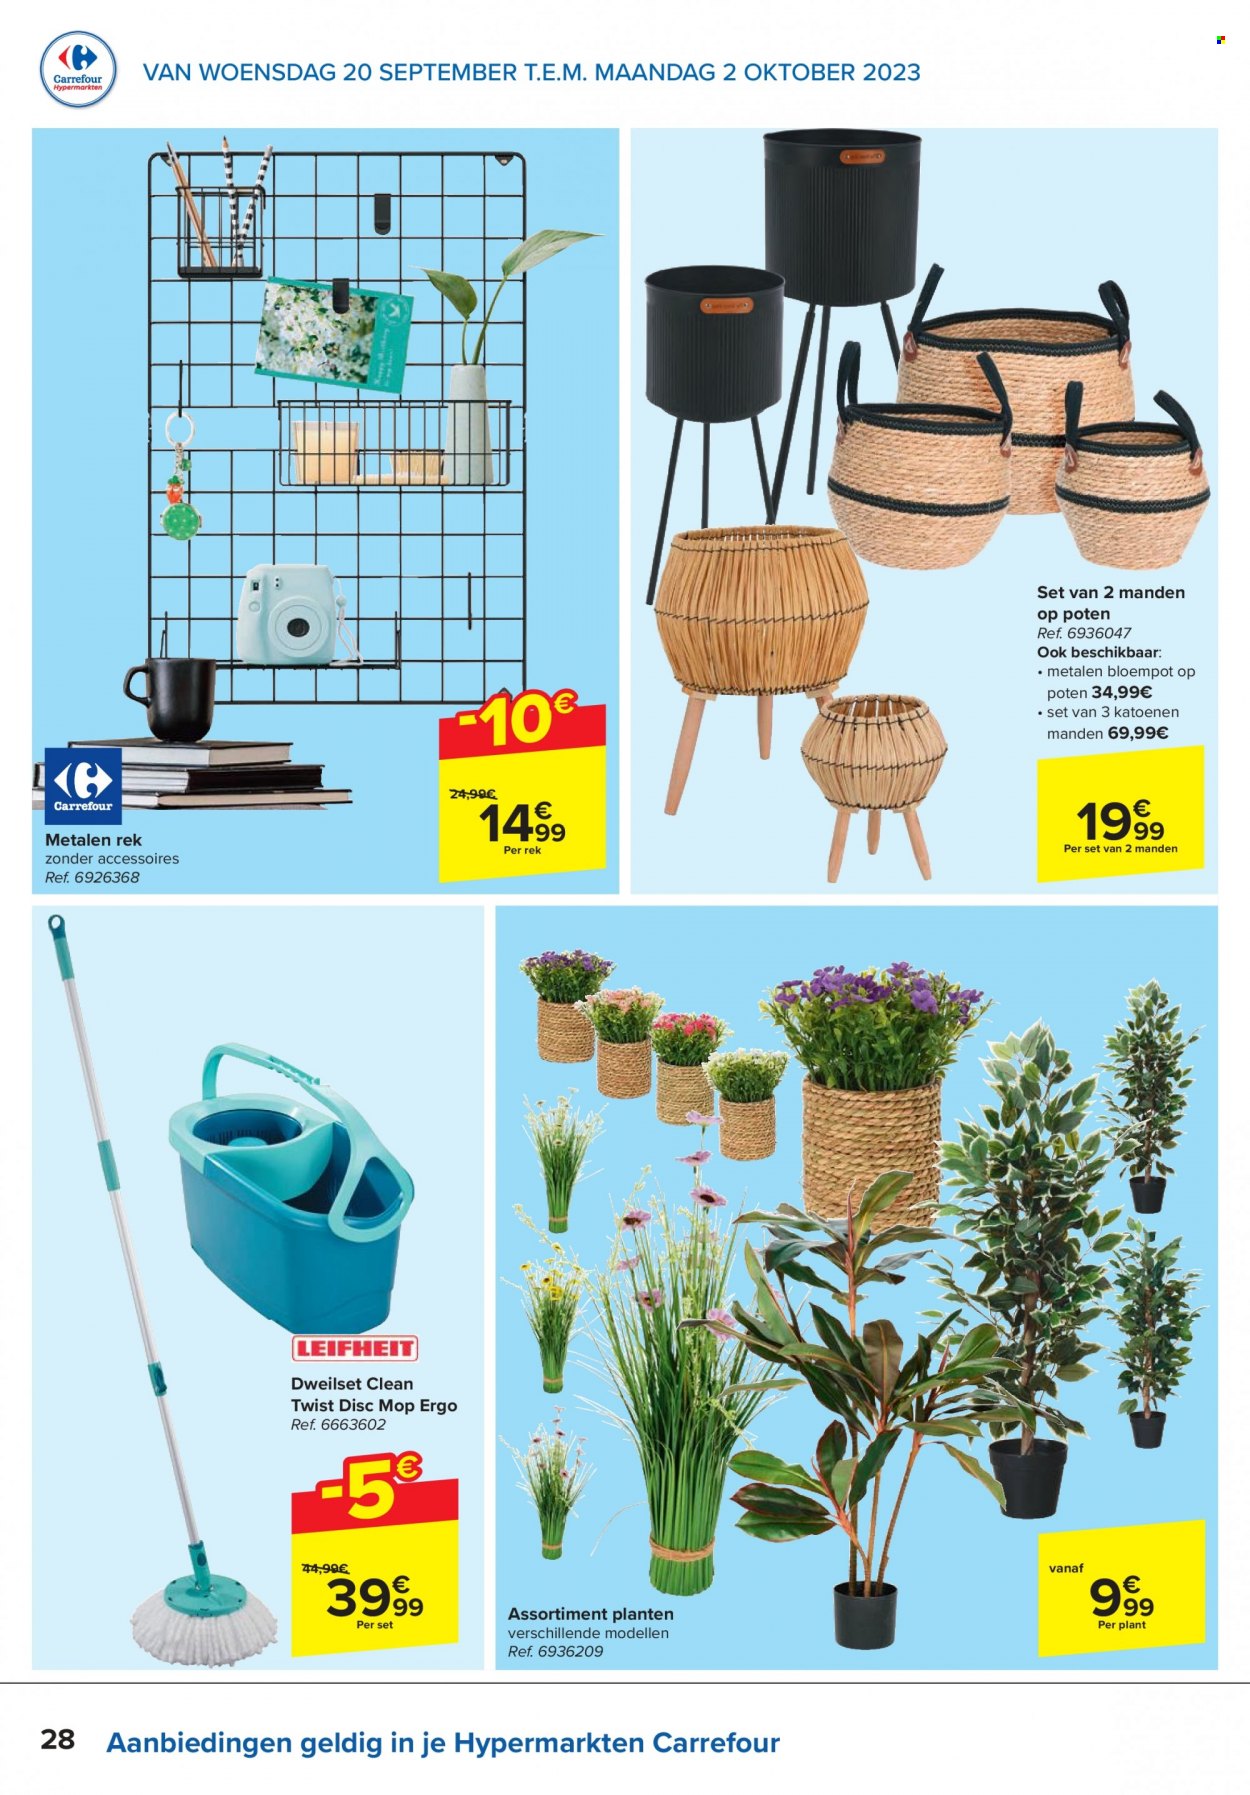 Catalogue Carrefour hypermarkt - 20.9.2023 - 2.10.2023. Page 28.